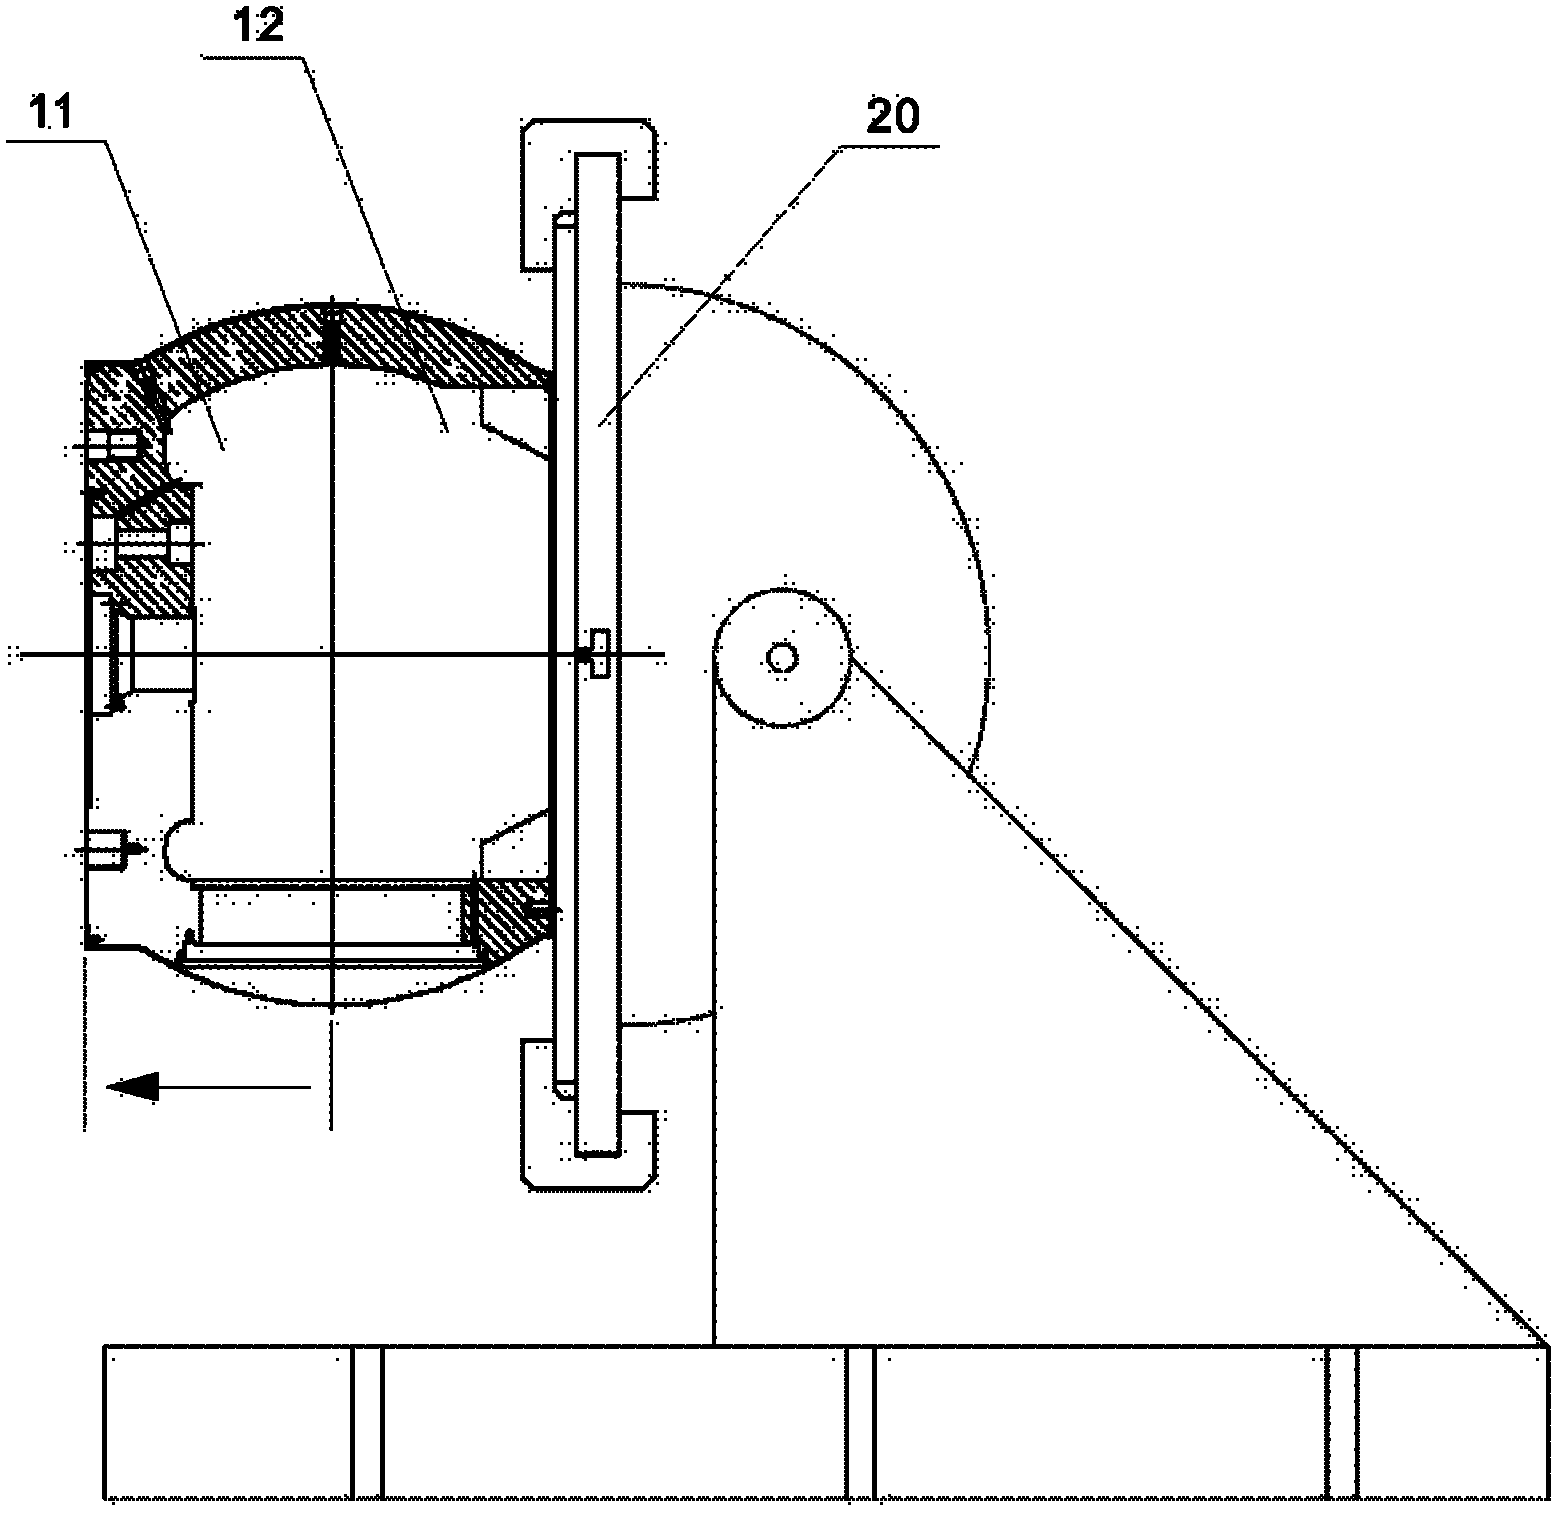 Method for cladding wear-resisting layer on surface of runner hub of hydraulic turbine